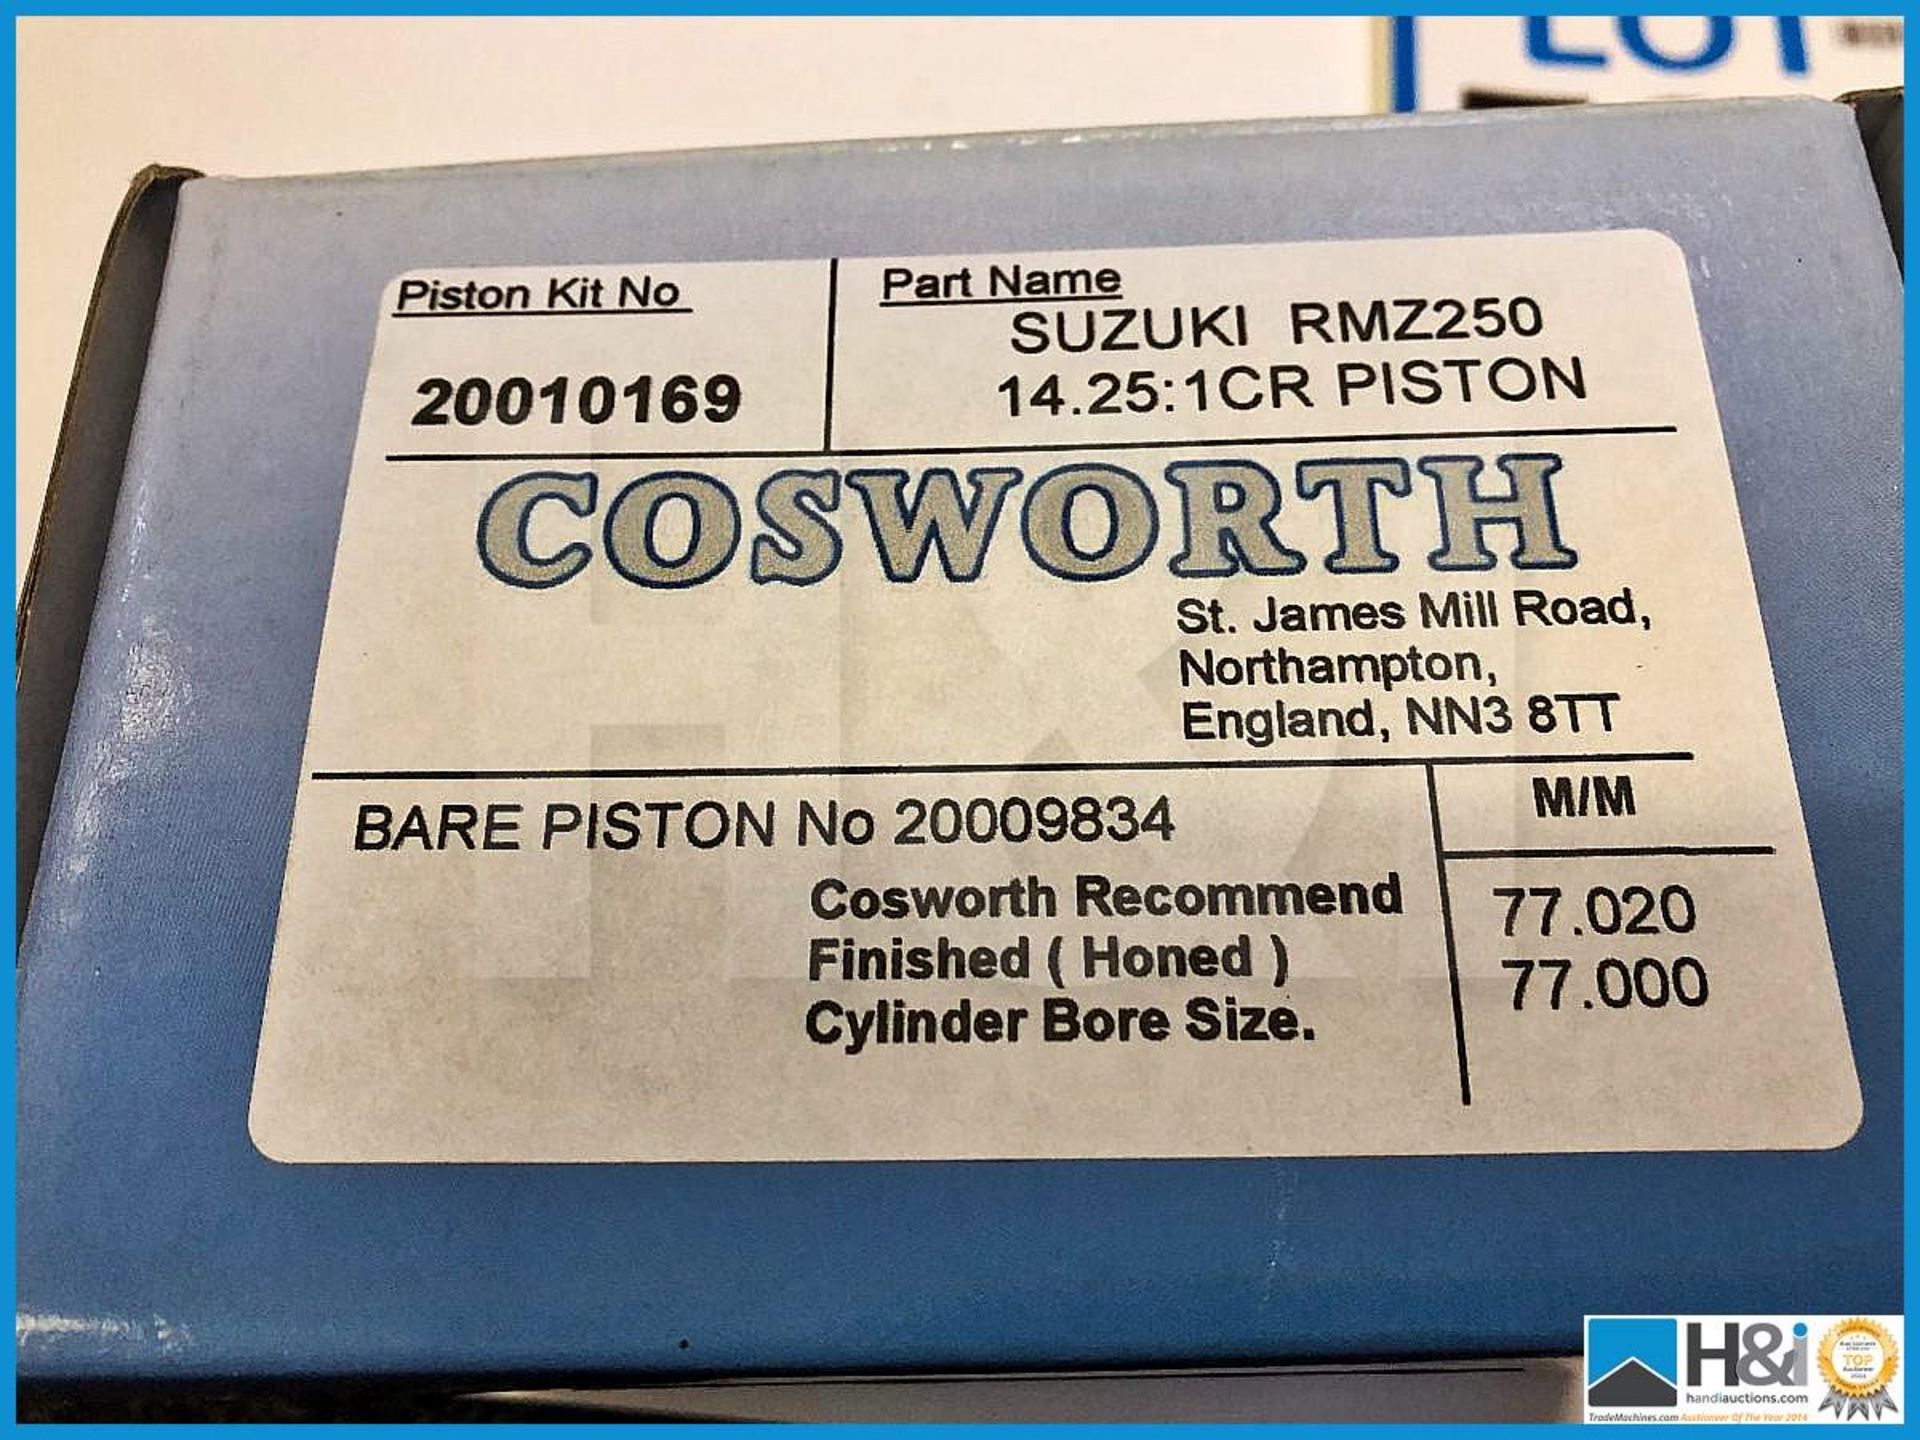 12 x Cosworth Piston Kit Complete KX250F 14.25CR. Code 20010167. Lot 81. RRP GBP 1148 - Image 4 of 5